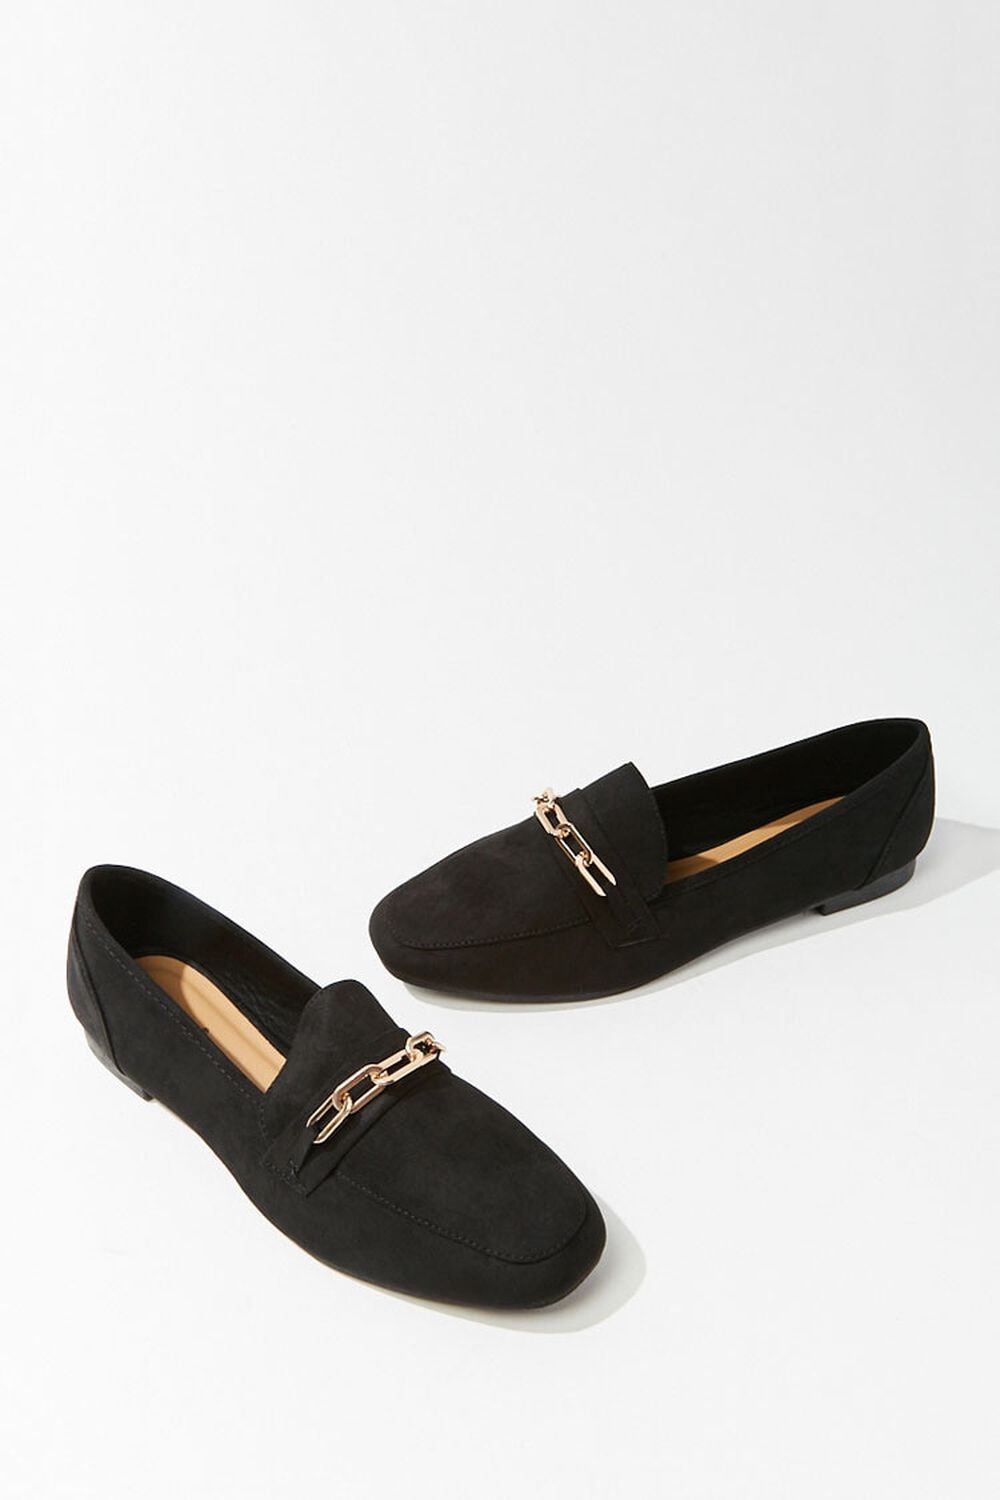 Faux Suede Chain Accent Loafers, image 3